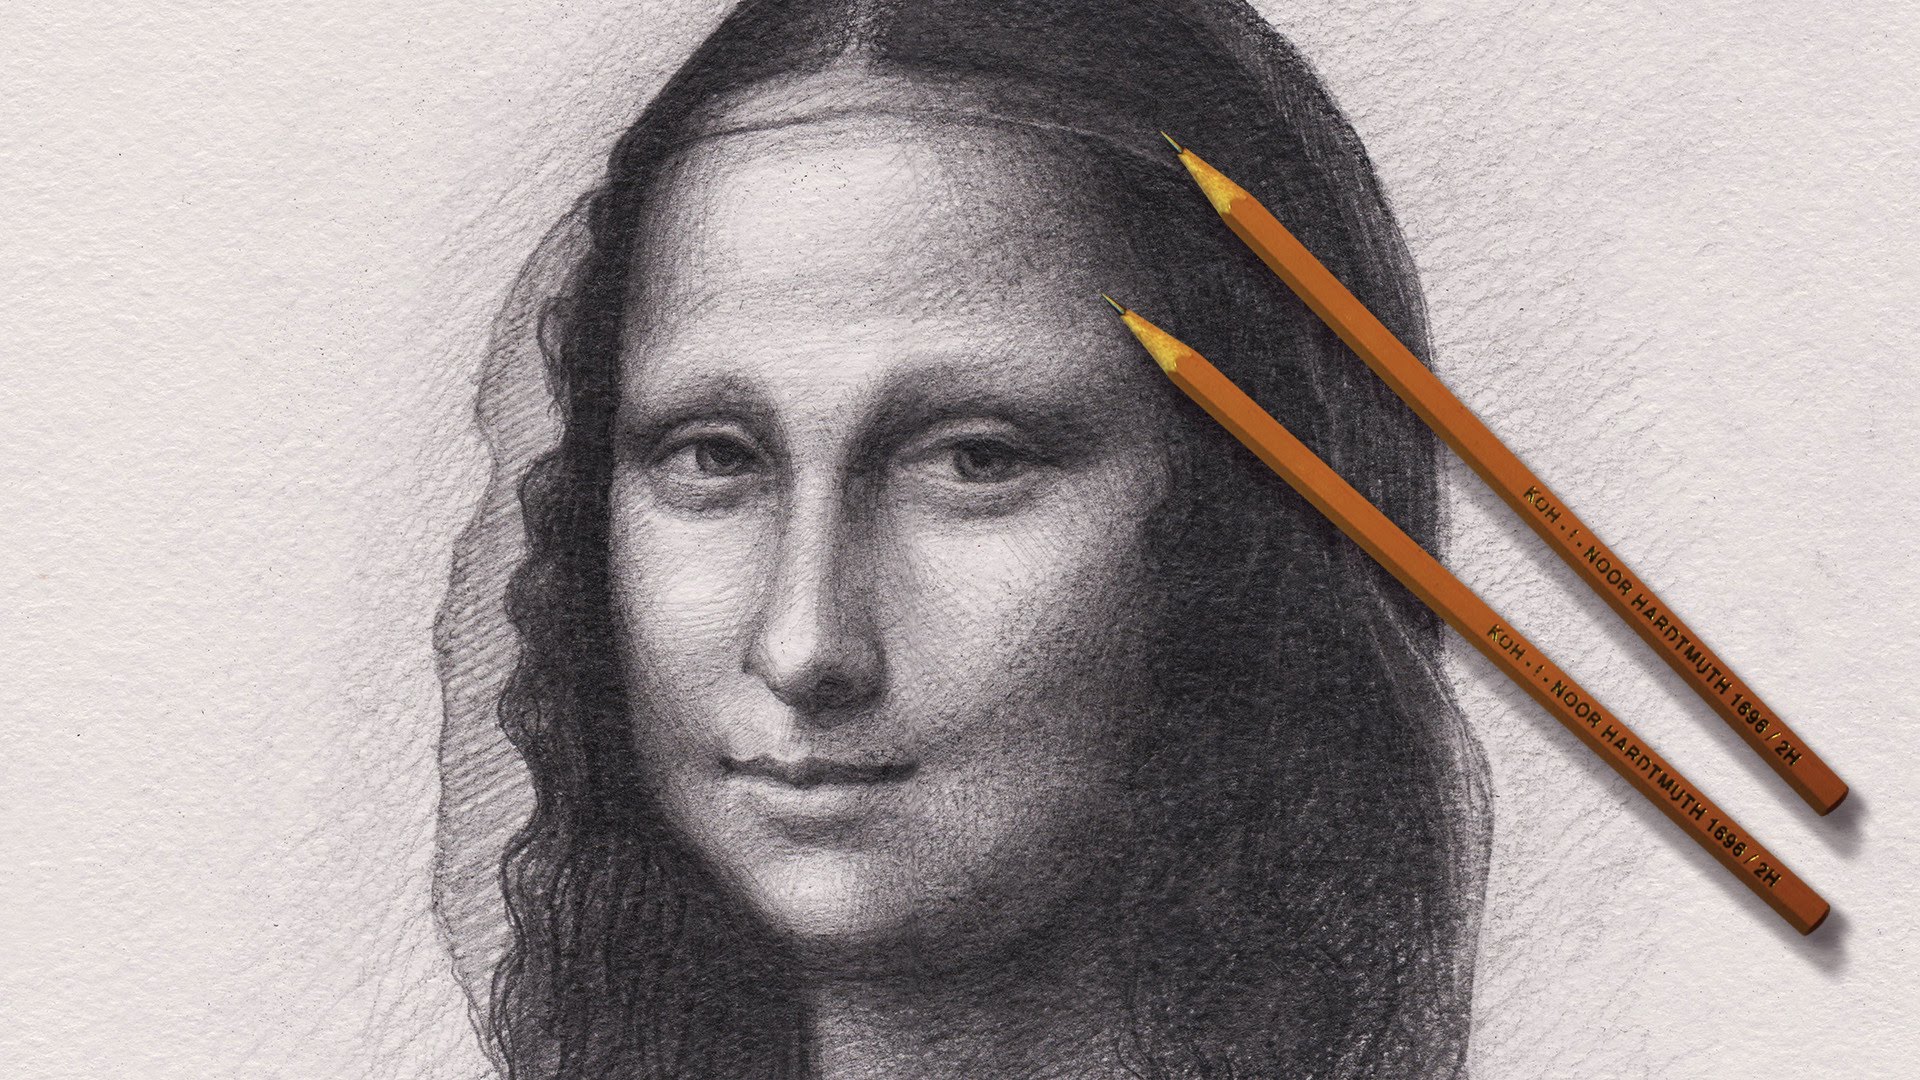 Mona Lisa Sketch at Explore collection of Mona